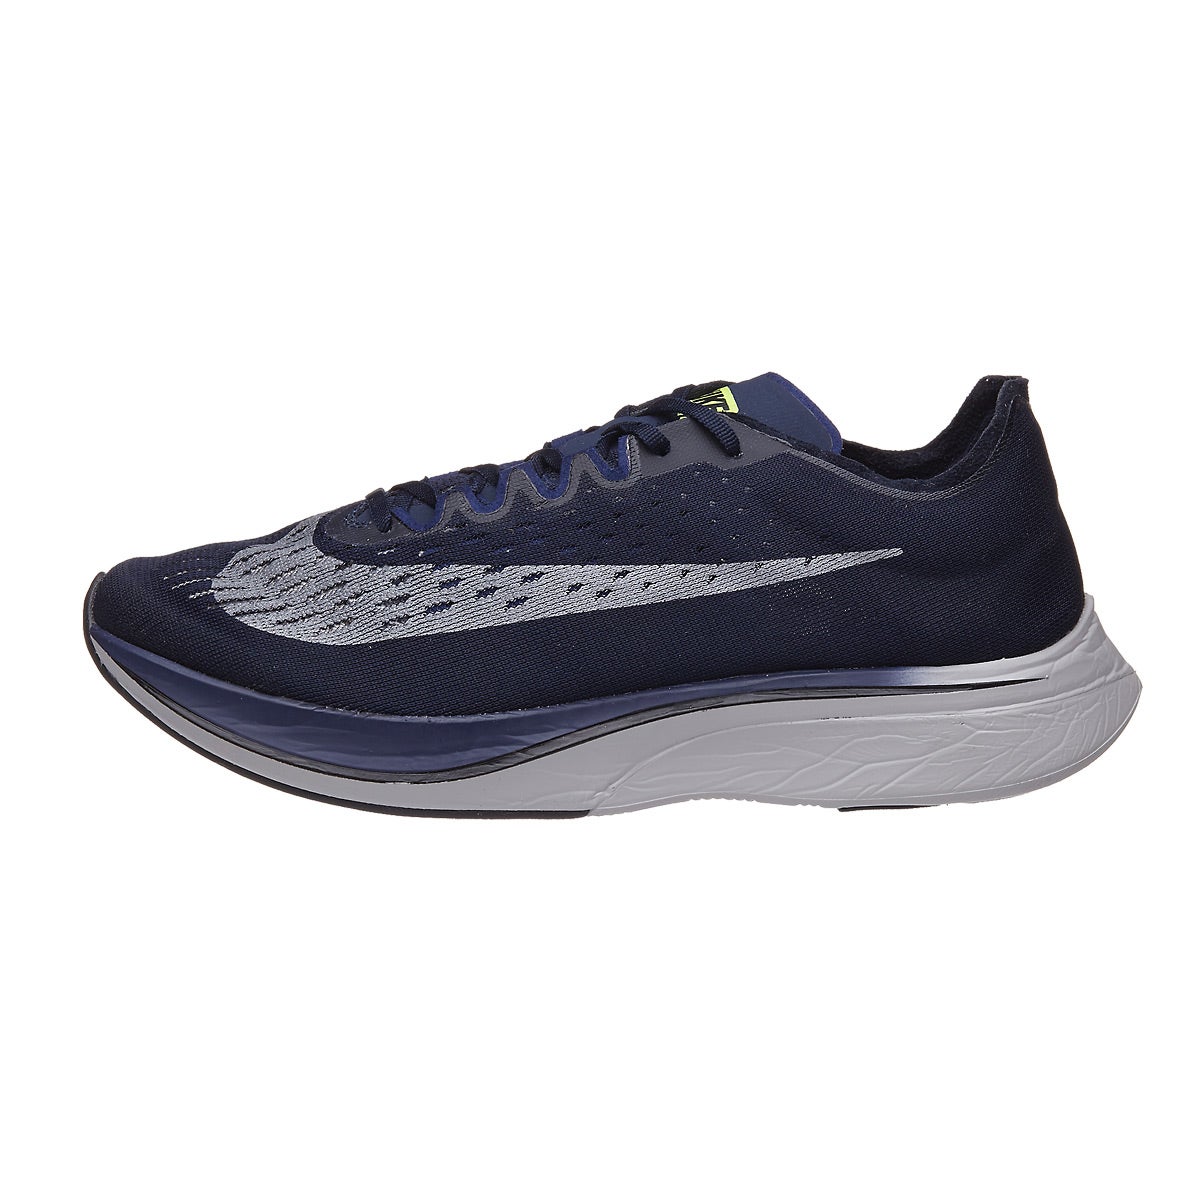 Nike Zoom Vaporfly 4% Unisex Shoes Obsidian/Silver 360° View | Running ...